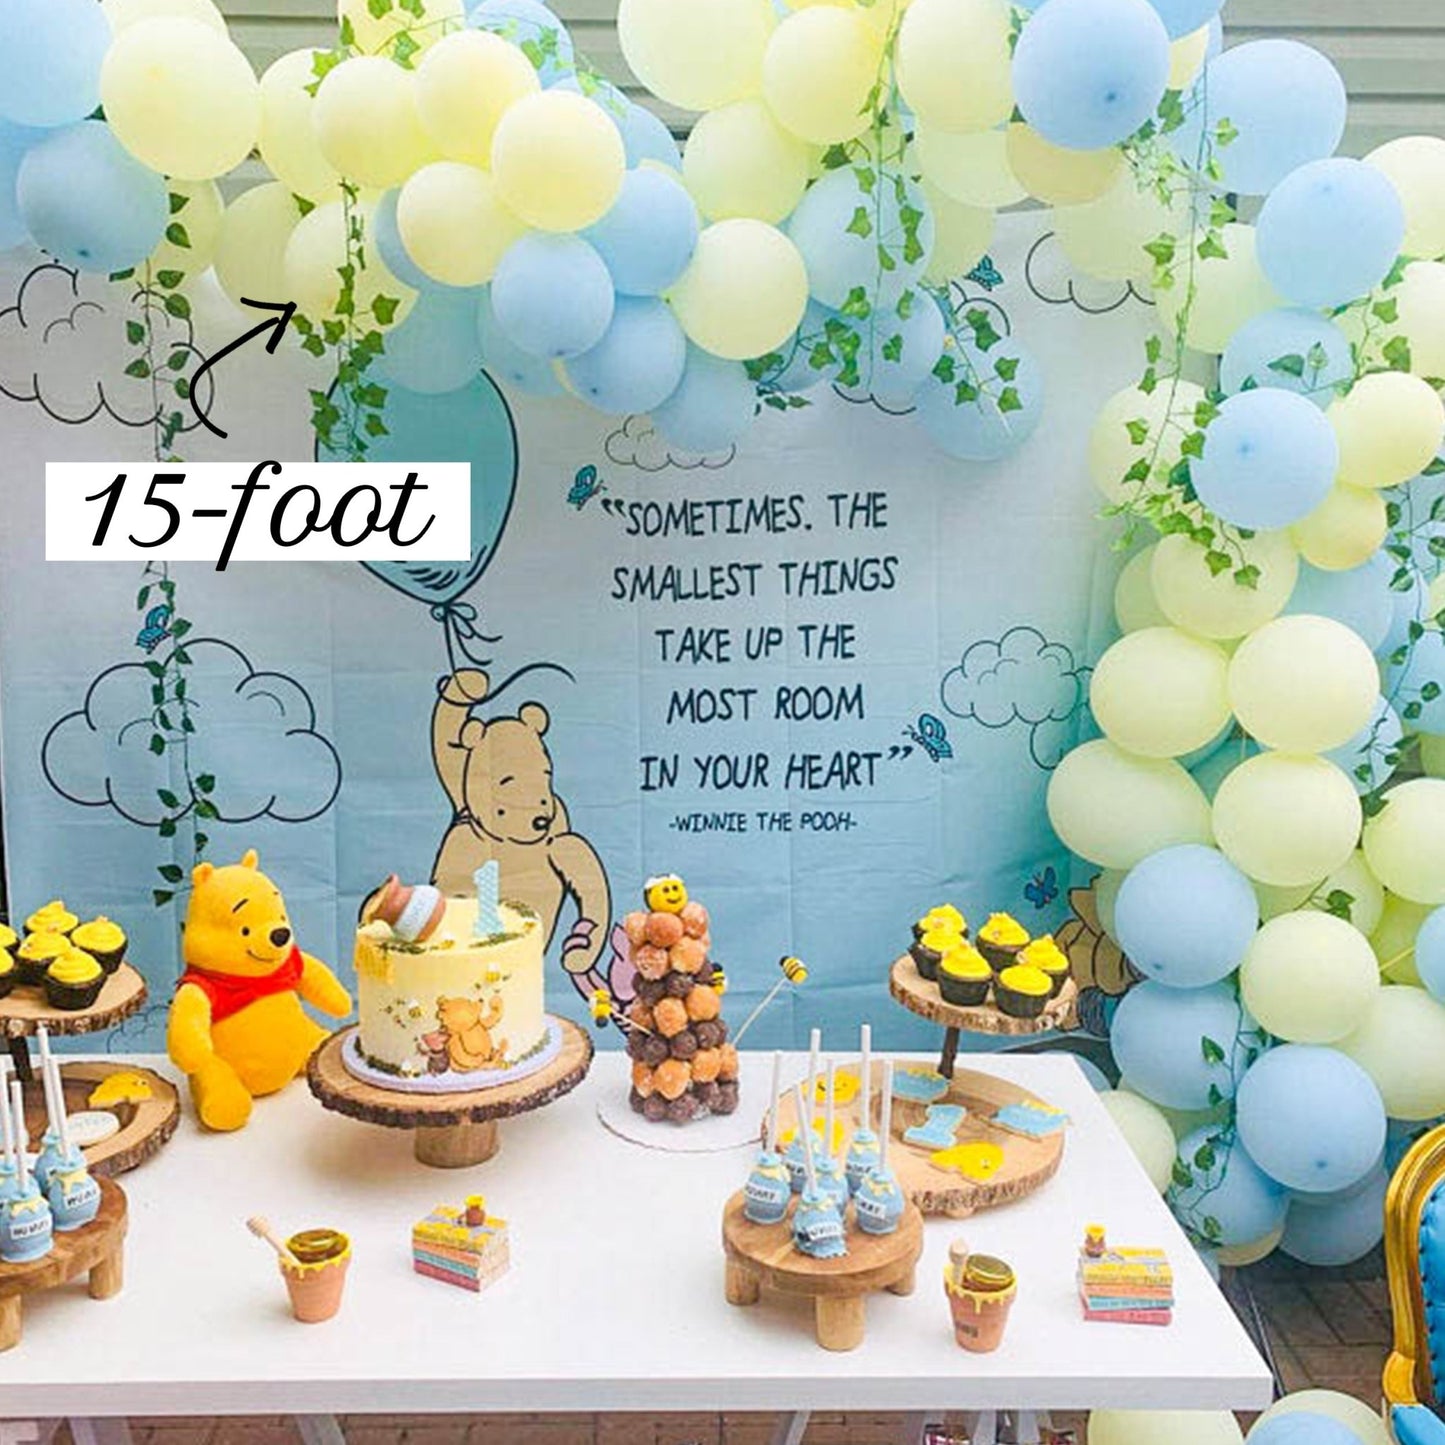 Classic Pooh Balloon Arch - Blue and Yellow Balloon Garland Kit - Ellie's Party Supply